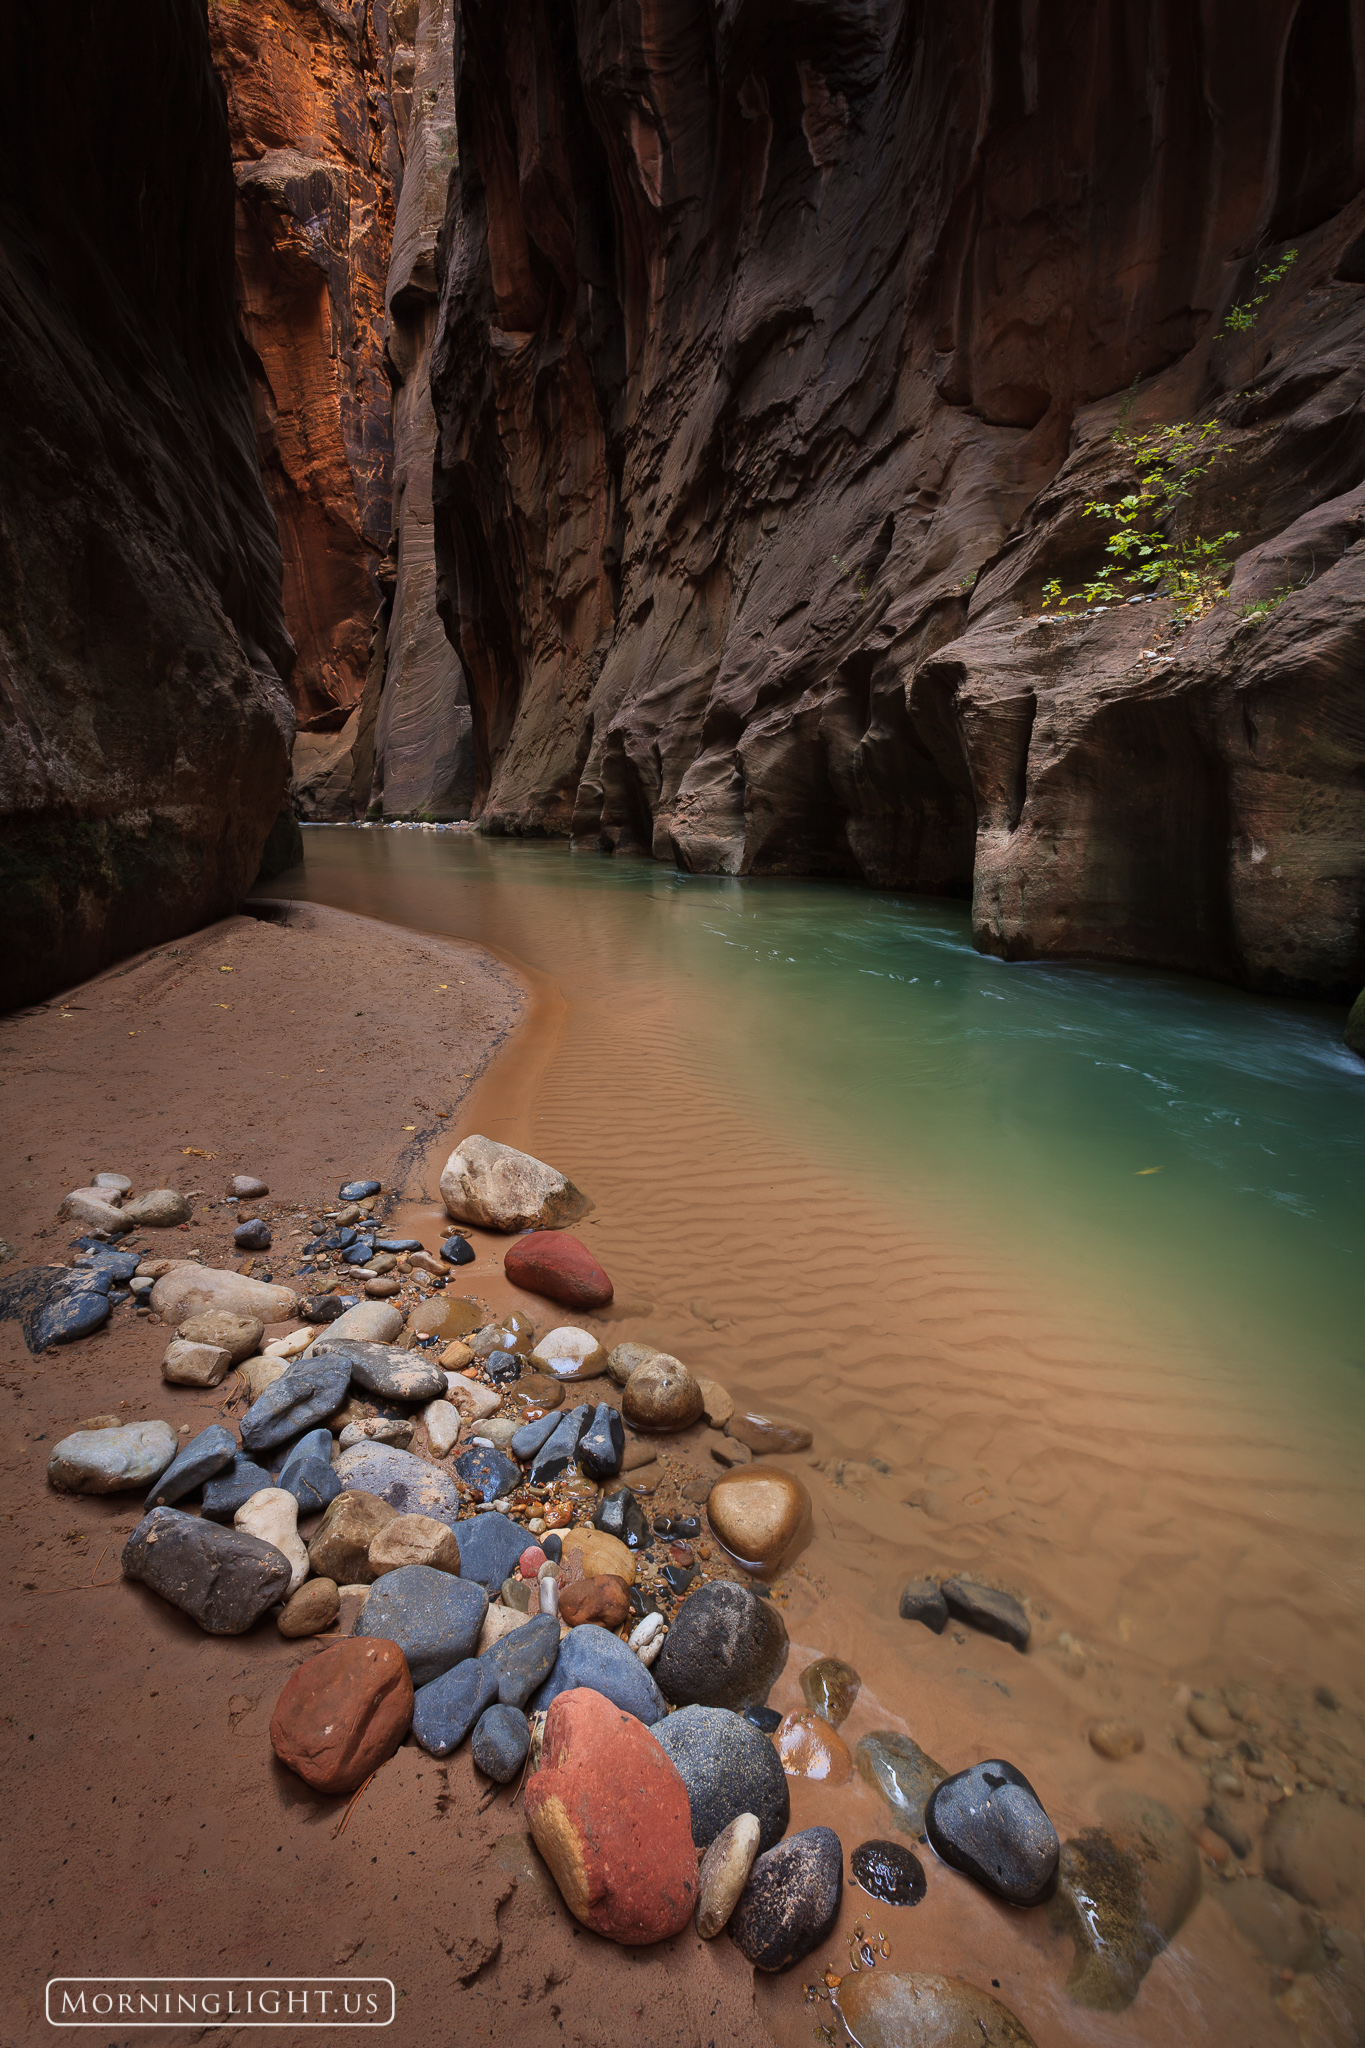 The Narrows in Zion National Park is one of the most spectacular places. It is a small crack in the earth about 150 feet deep...